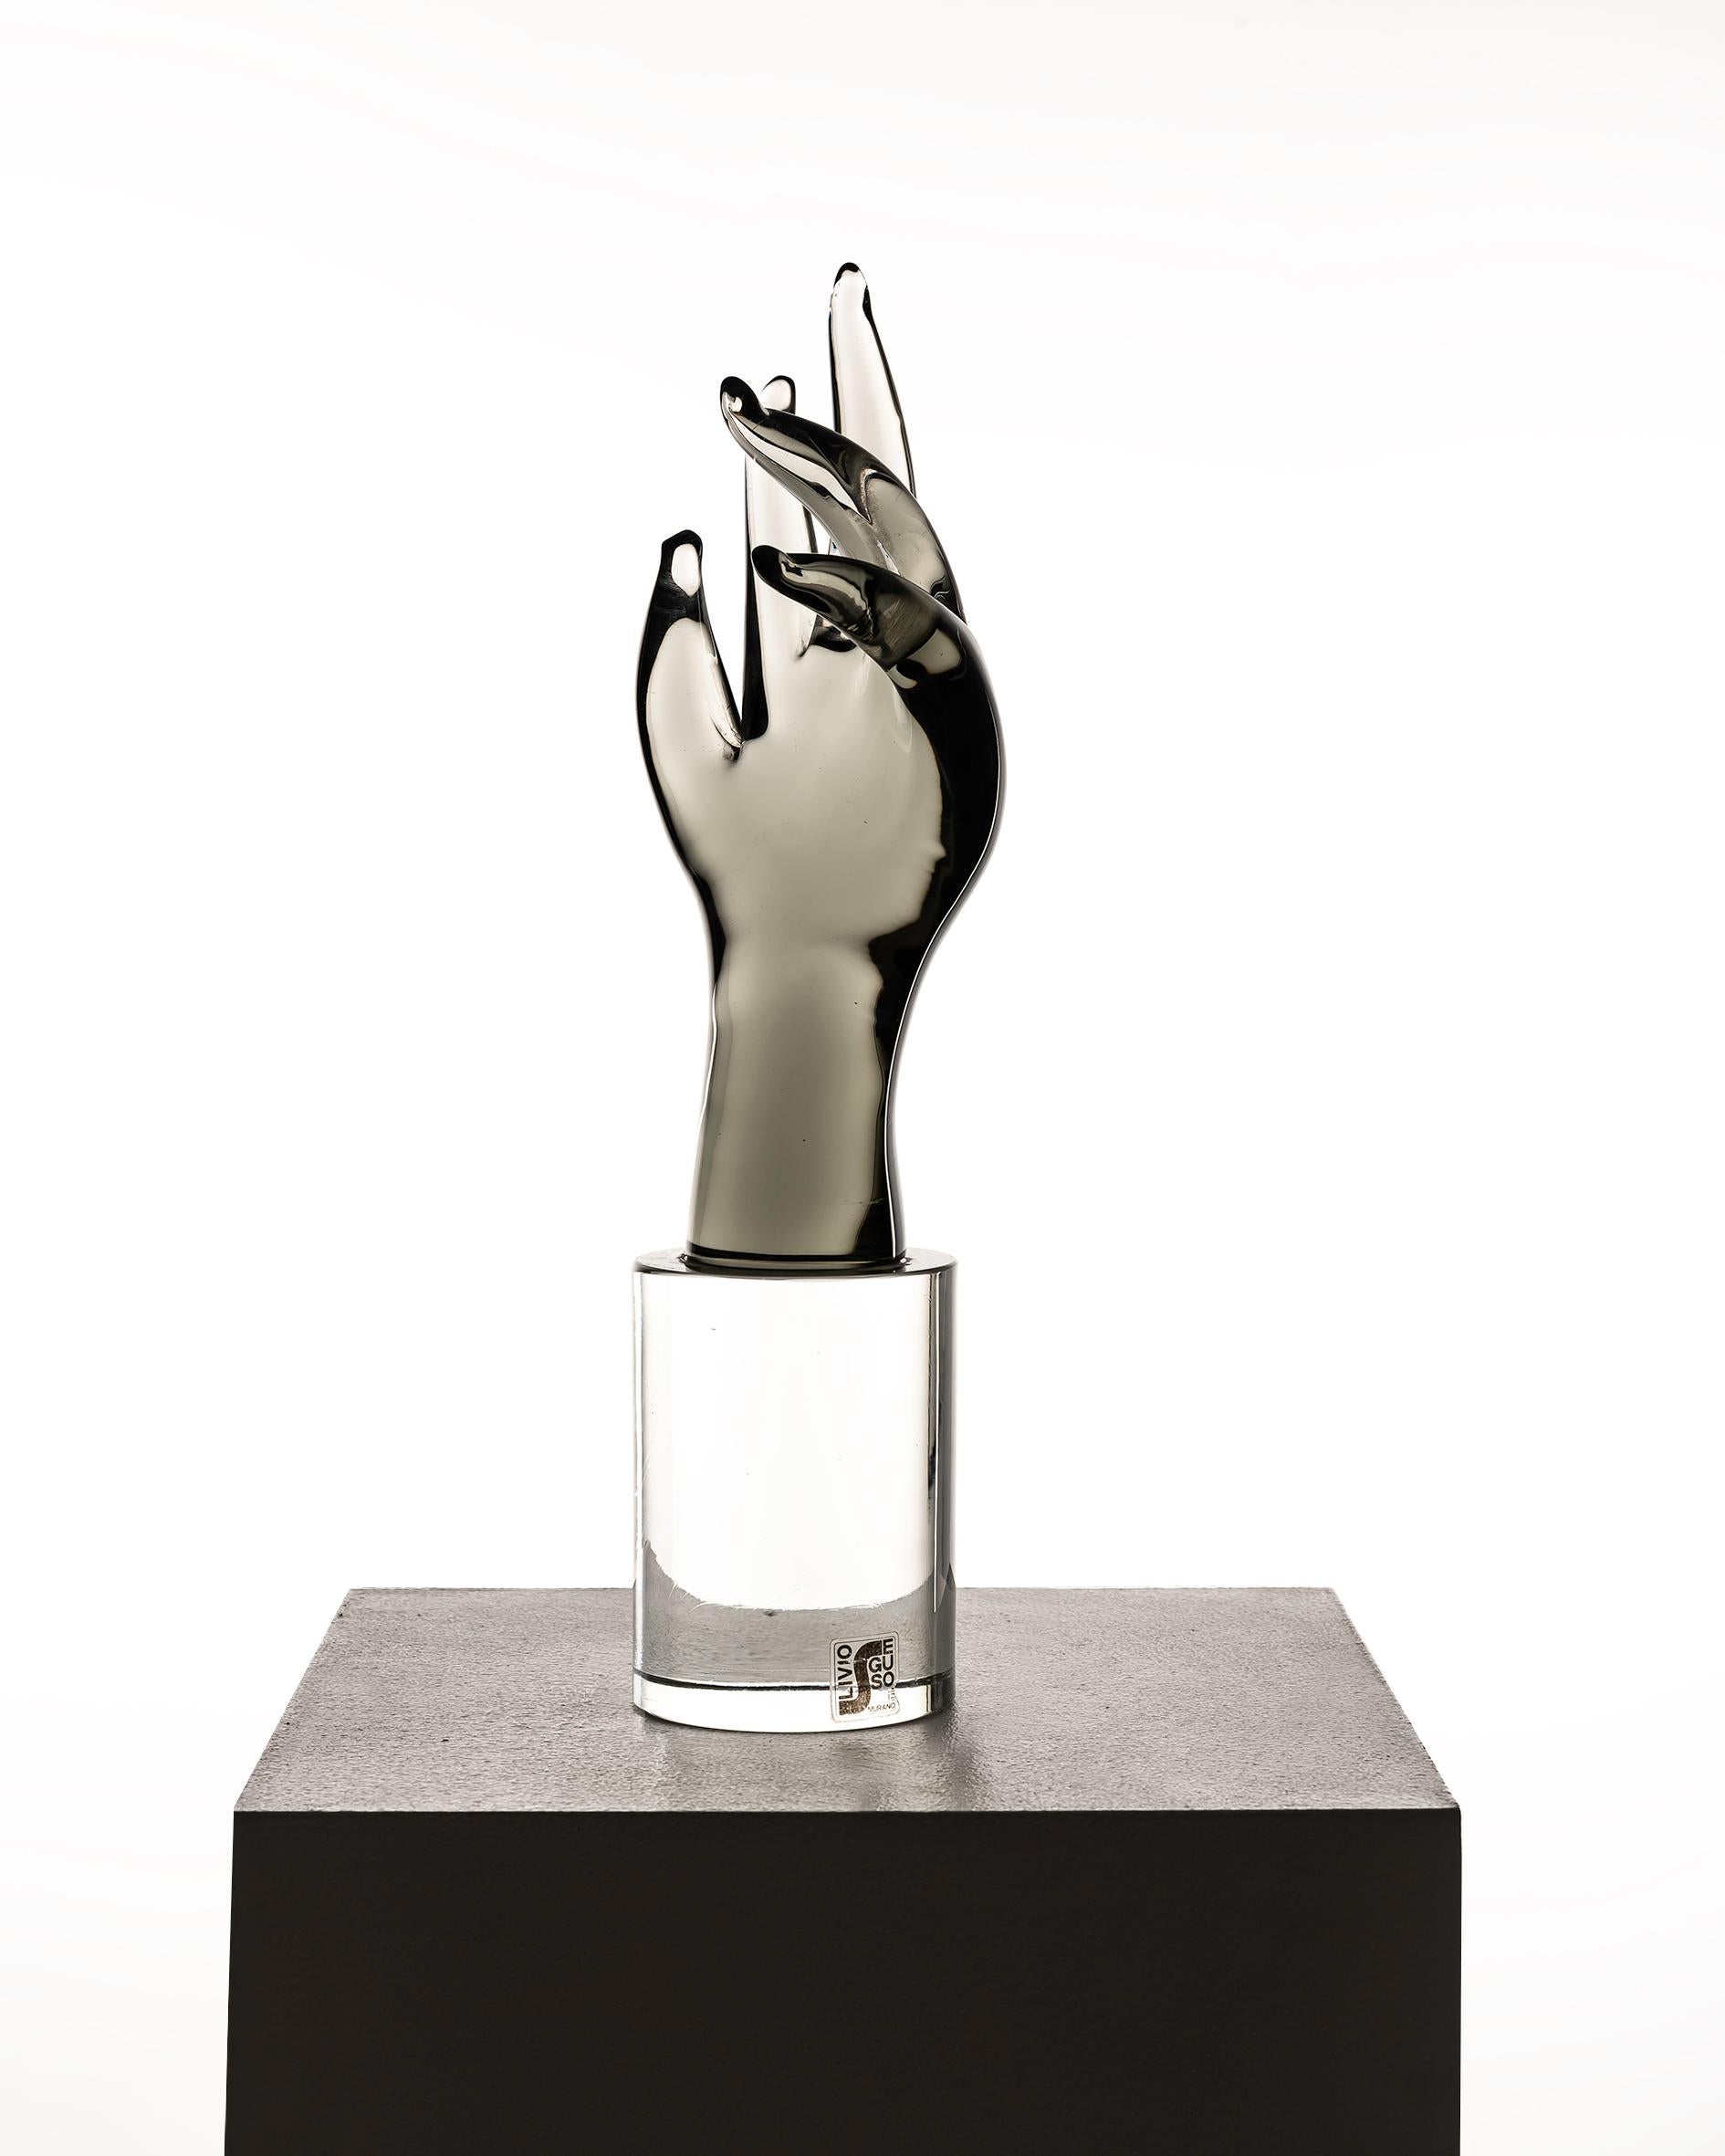 Glass Hand Sculpture by Livio Seguso, 1970s, in Flawless conditions. Designed 1970 to 1979 This piece has an attribution mark.
